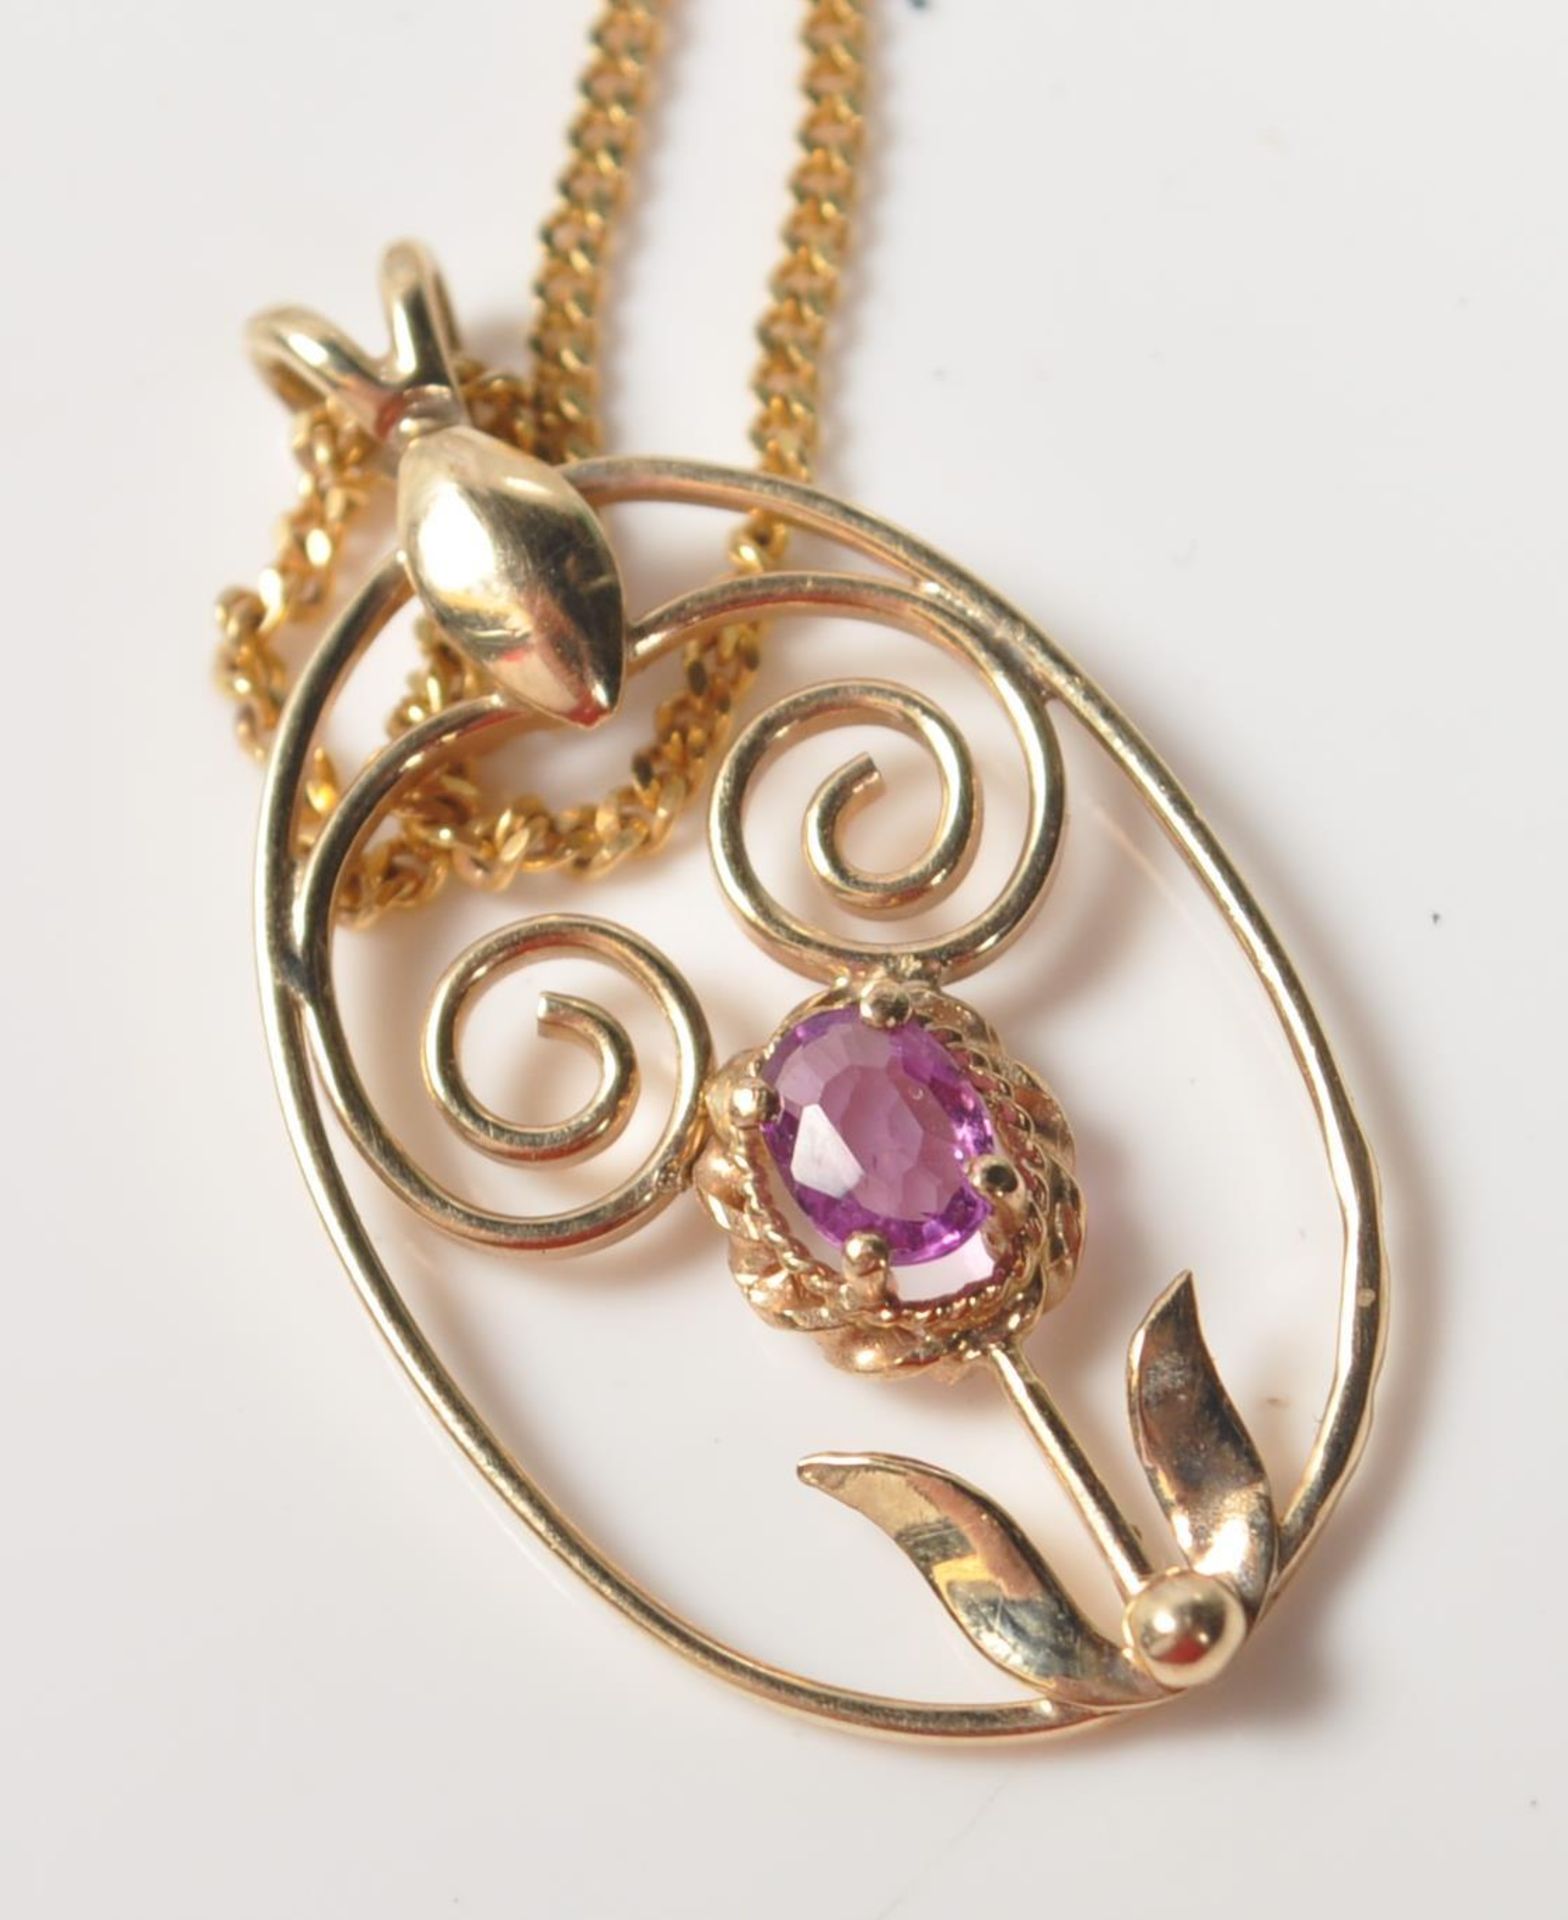 9CT GOLD AND PINK STONE PENDANT NECKLACE - Image 4 of 7